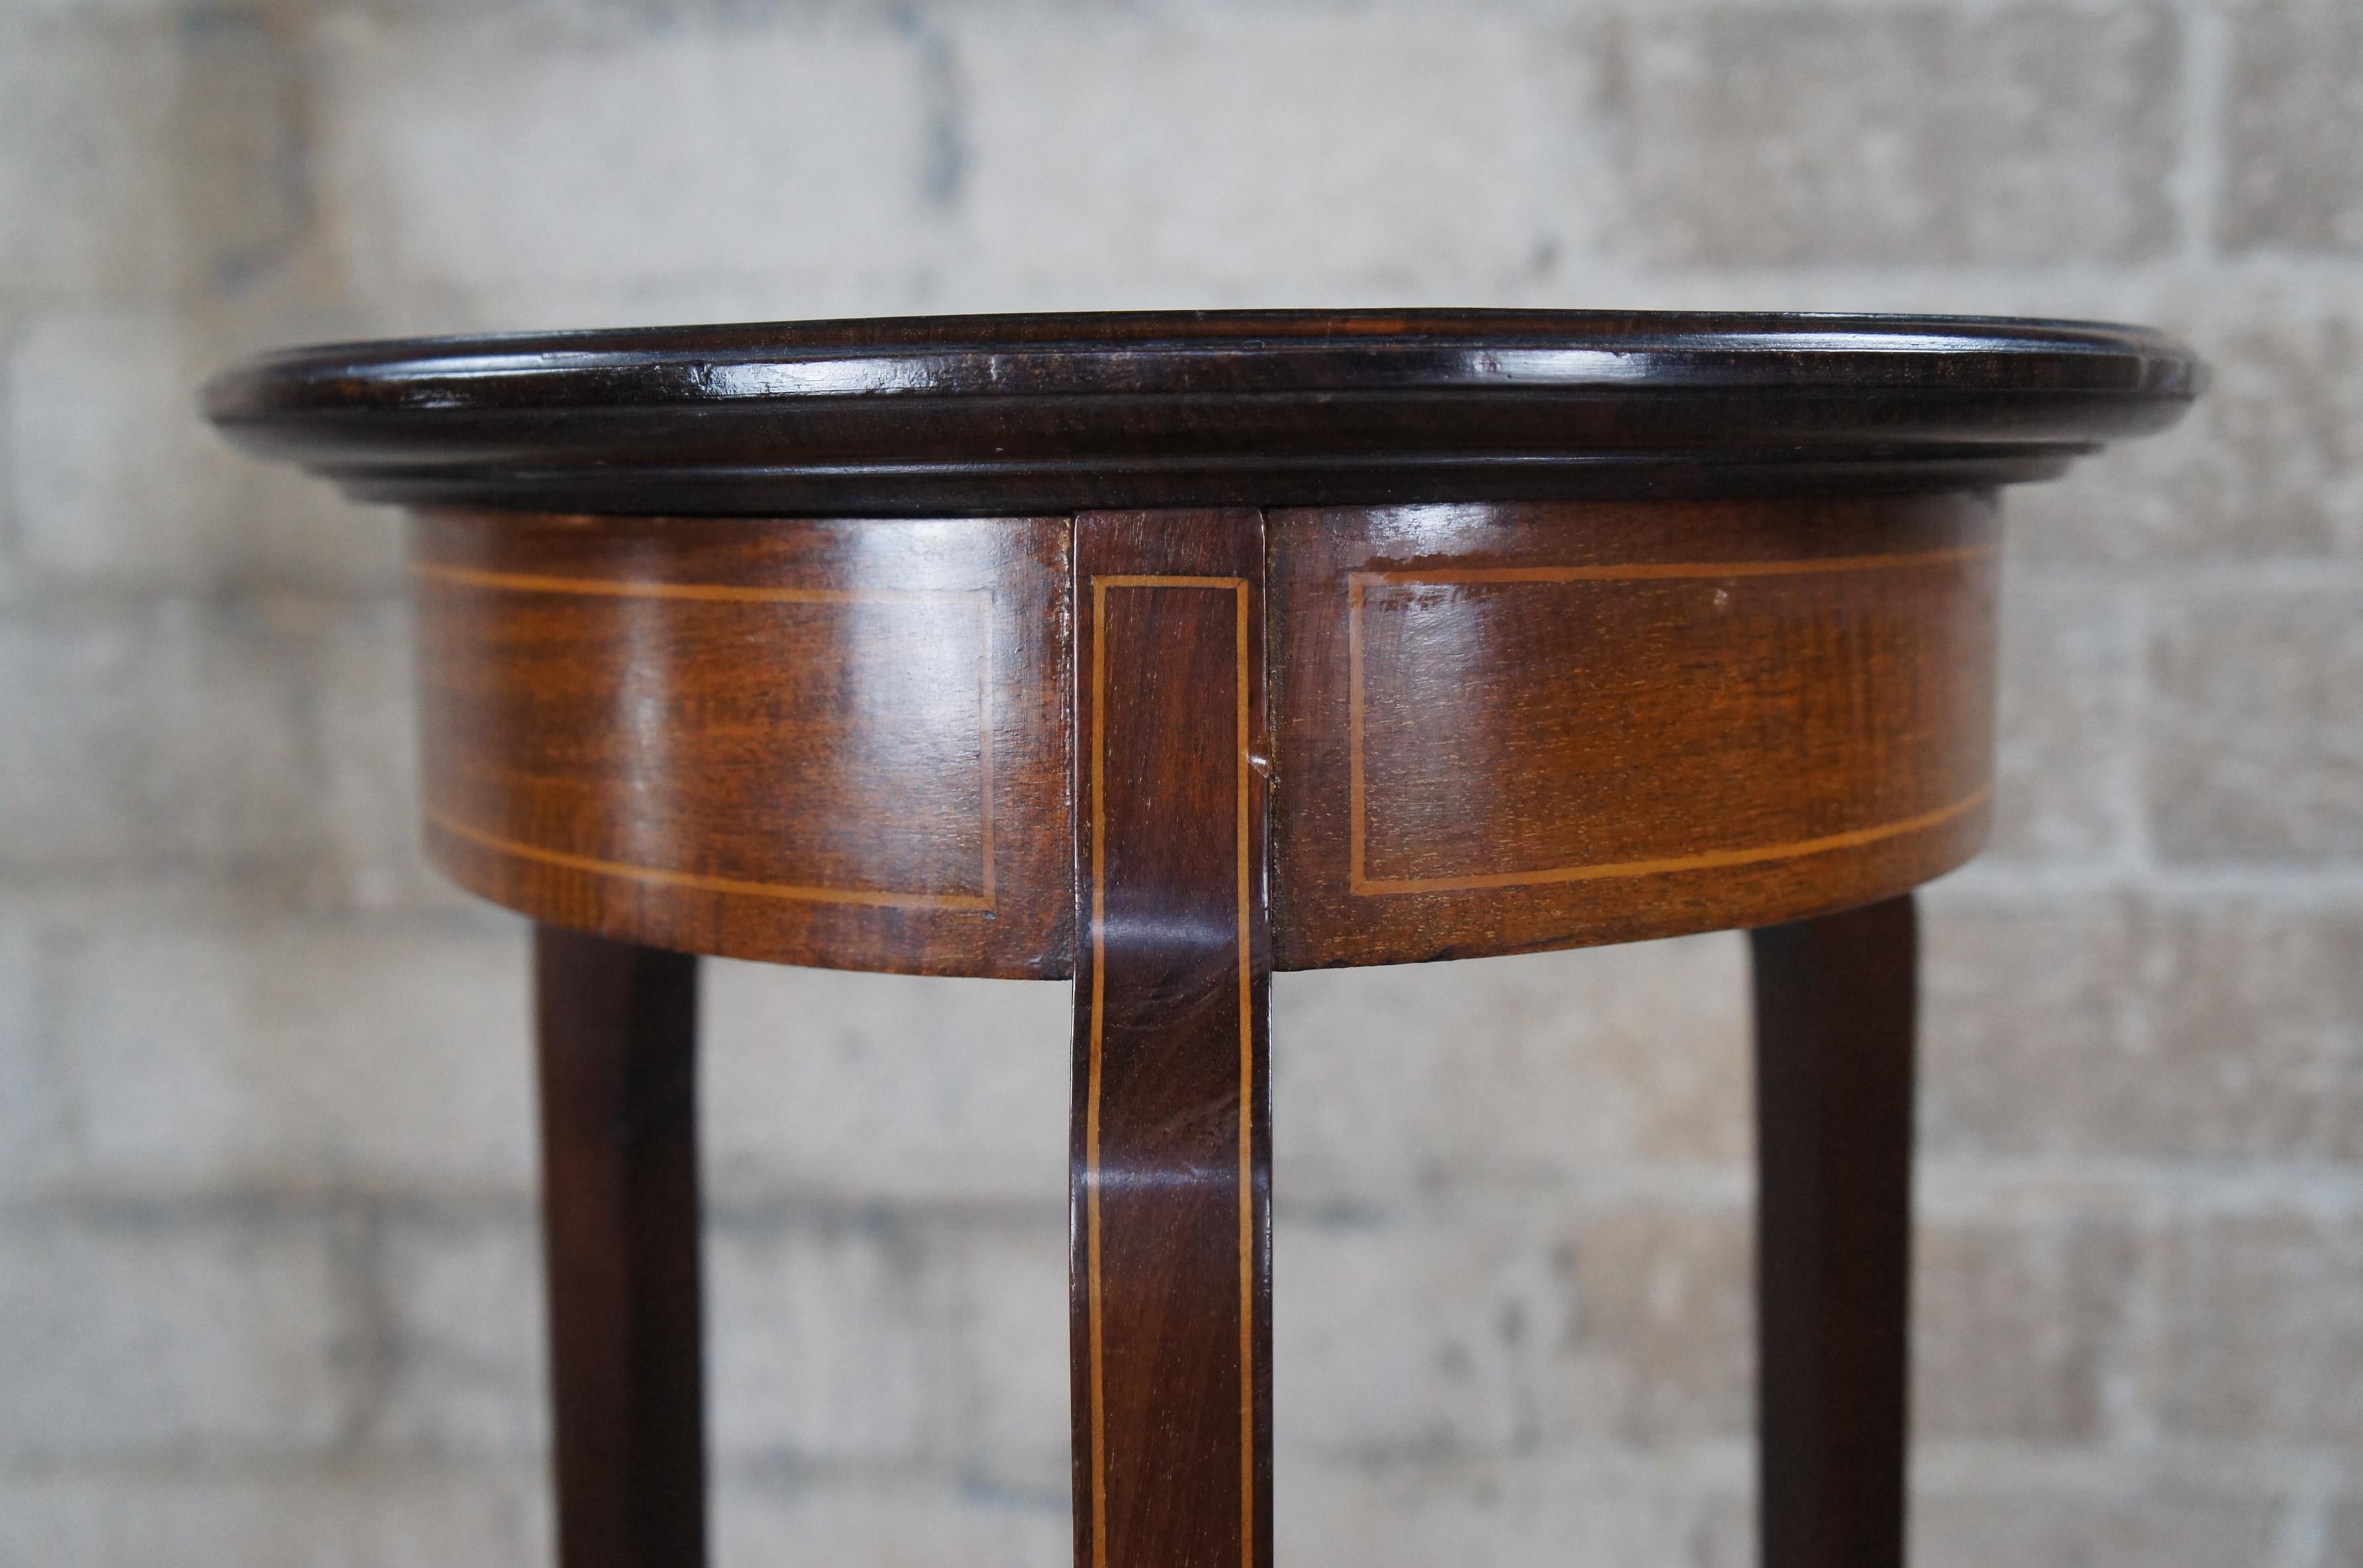 Antique Edwardian Sheraton Mahogany Inlaid Plant Stand Sculpture Pedestal Table For Sale 2